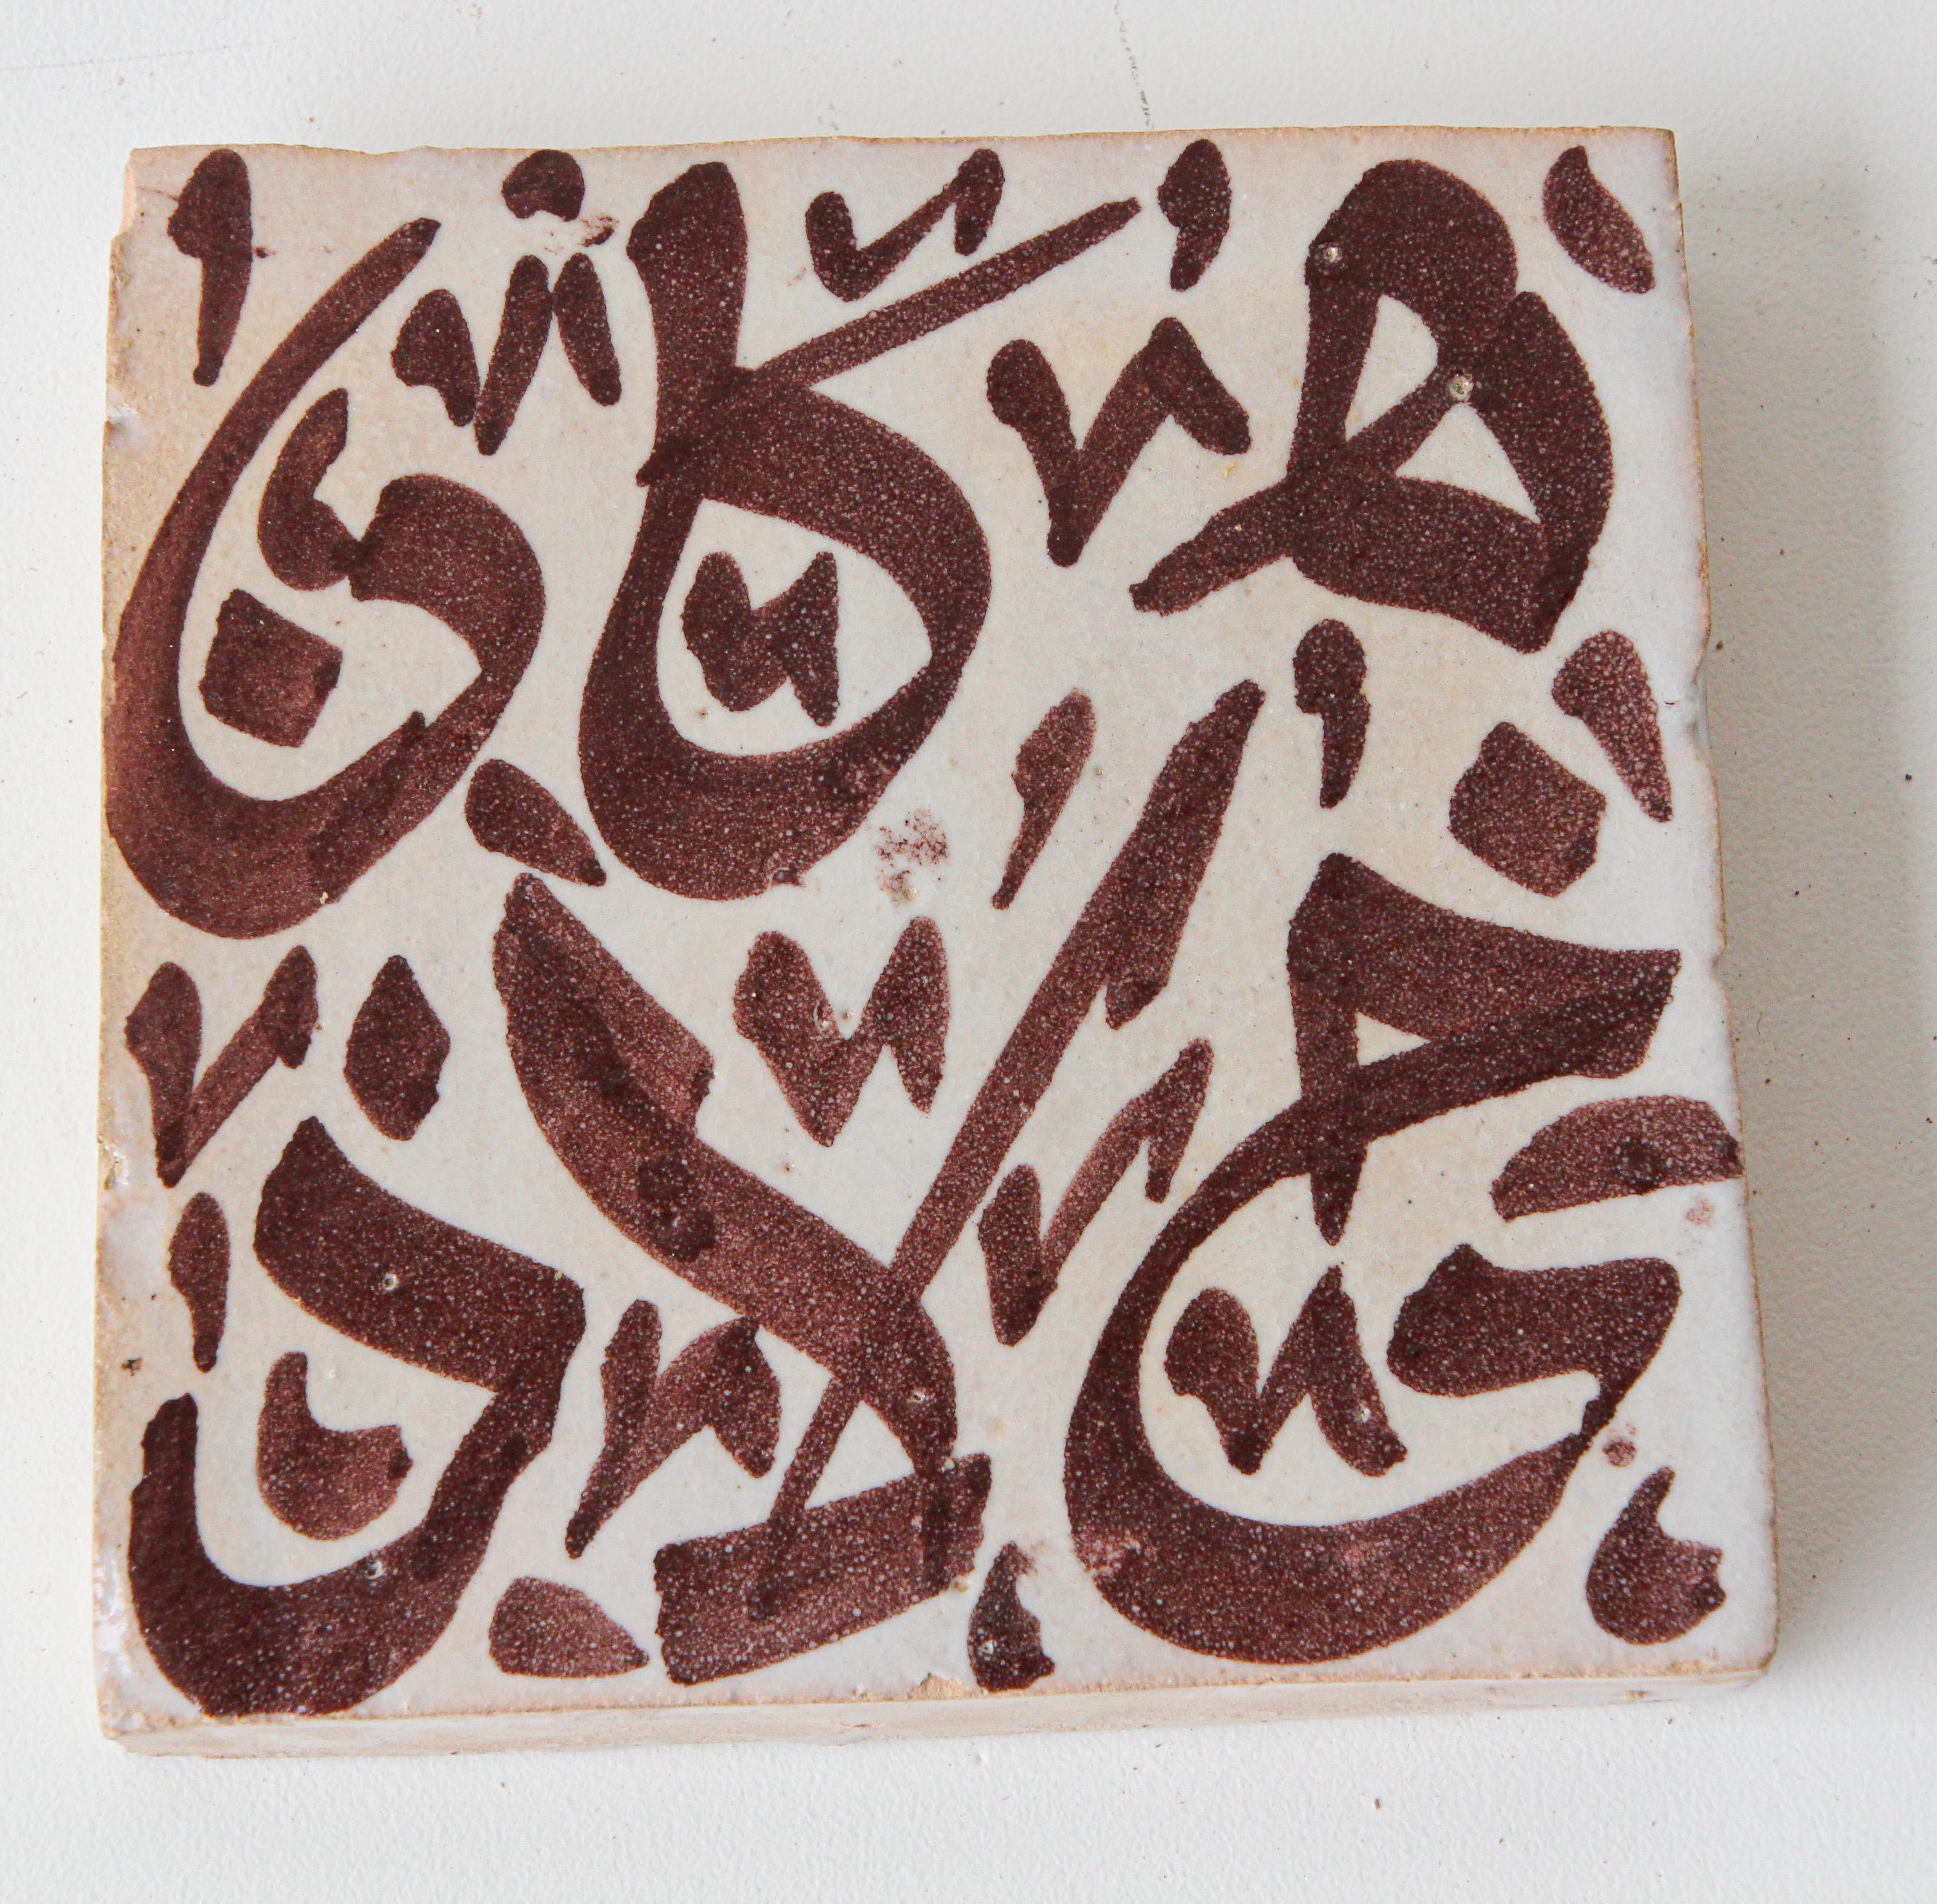 Moroccan handcrafted decorative tile with hand painted Arabic writing in brown on ivory crackle glazed ceramic.
Arabic writing on ceramic tile hand-painted by artist in Fez Morocco.
Great zellige decorative Moorish Artwork.
Tile is 4 in.x 4 in.